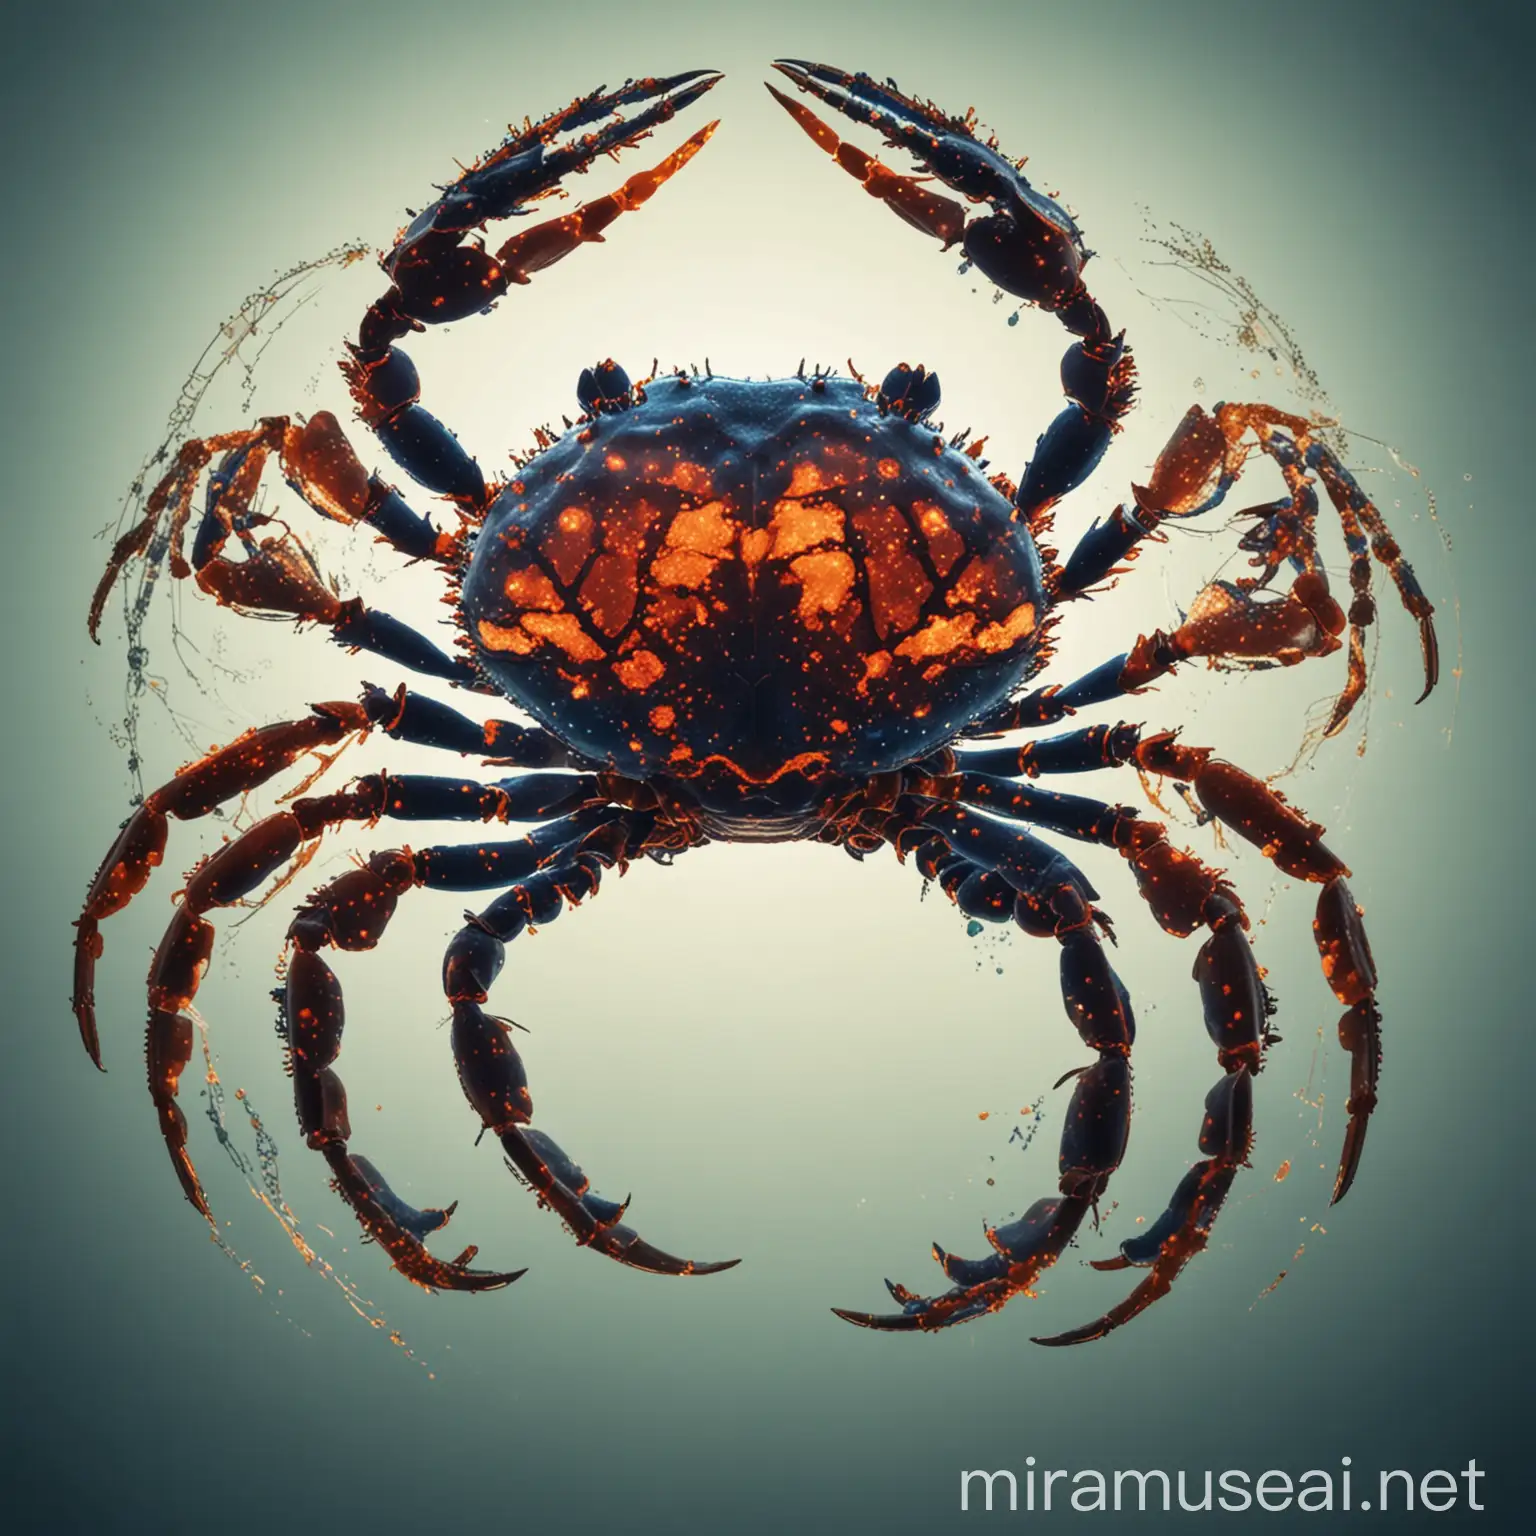 Innovative Medicine Double Exposure Genomics and Immunotherapy in Crab Silhouette